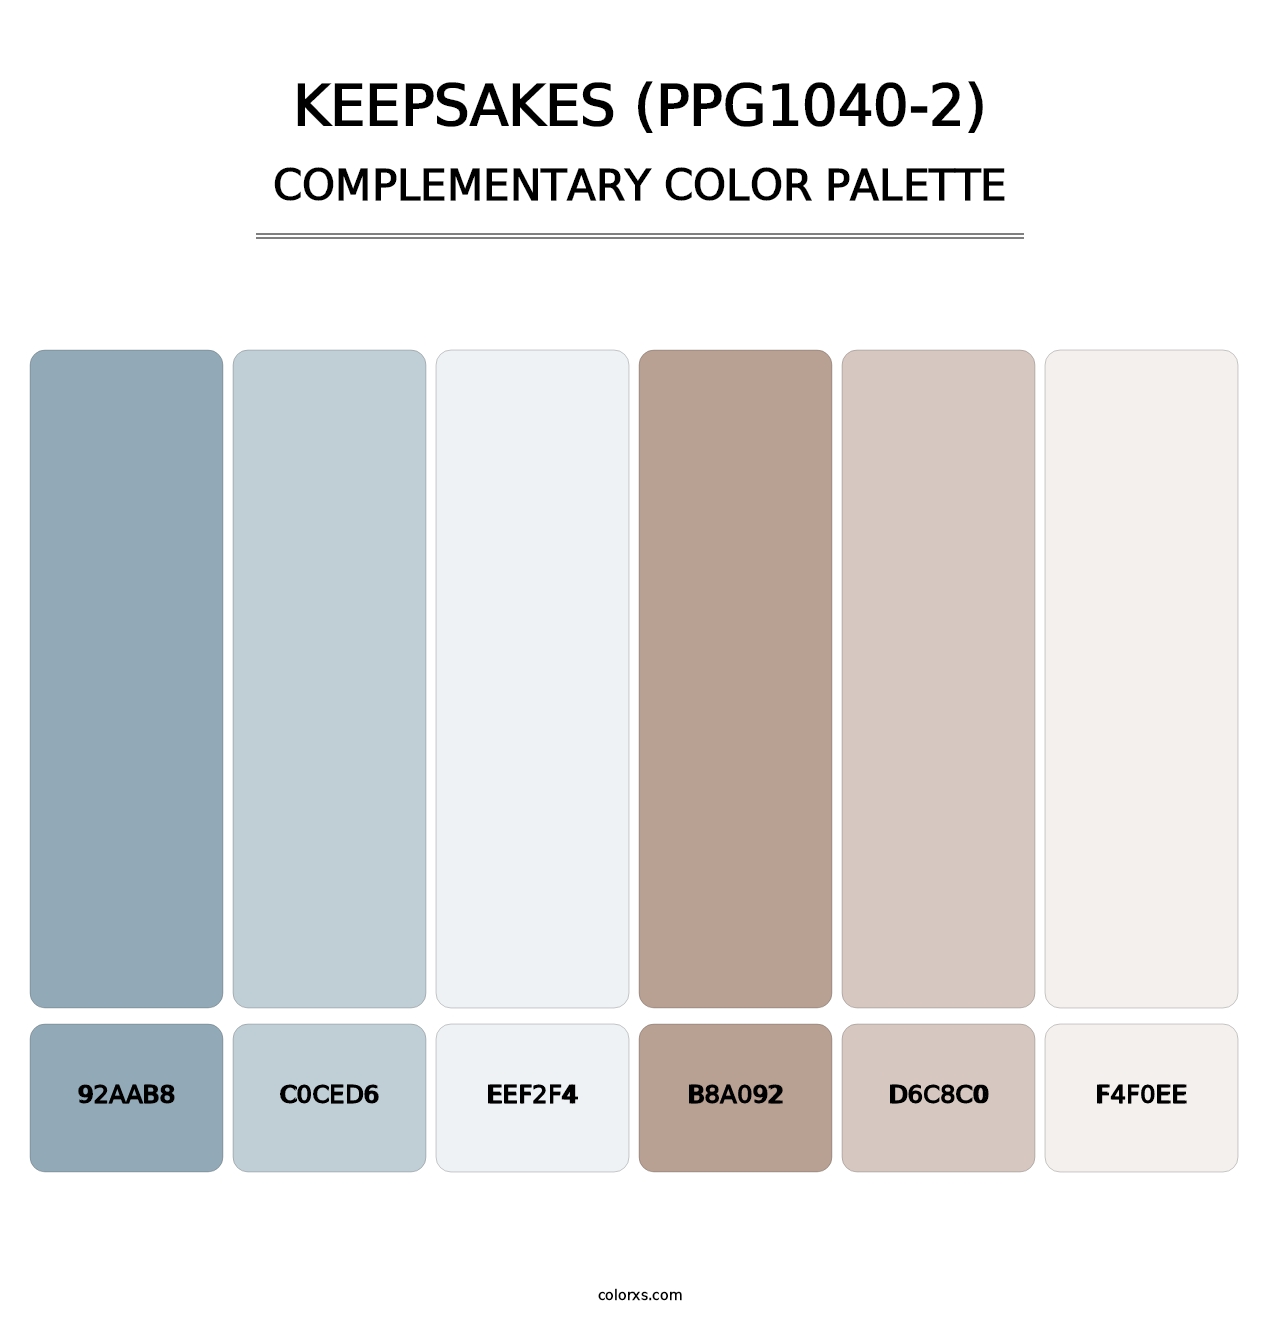 Keepsakes (PPG1040-2) - Complementary Color Palette